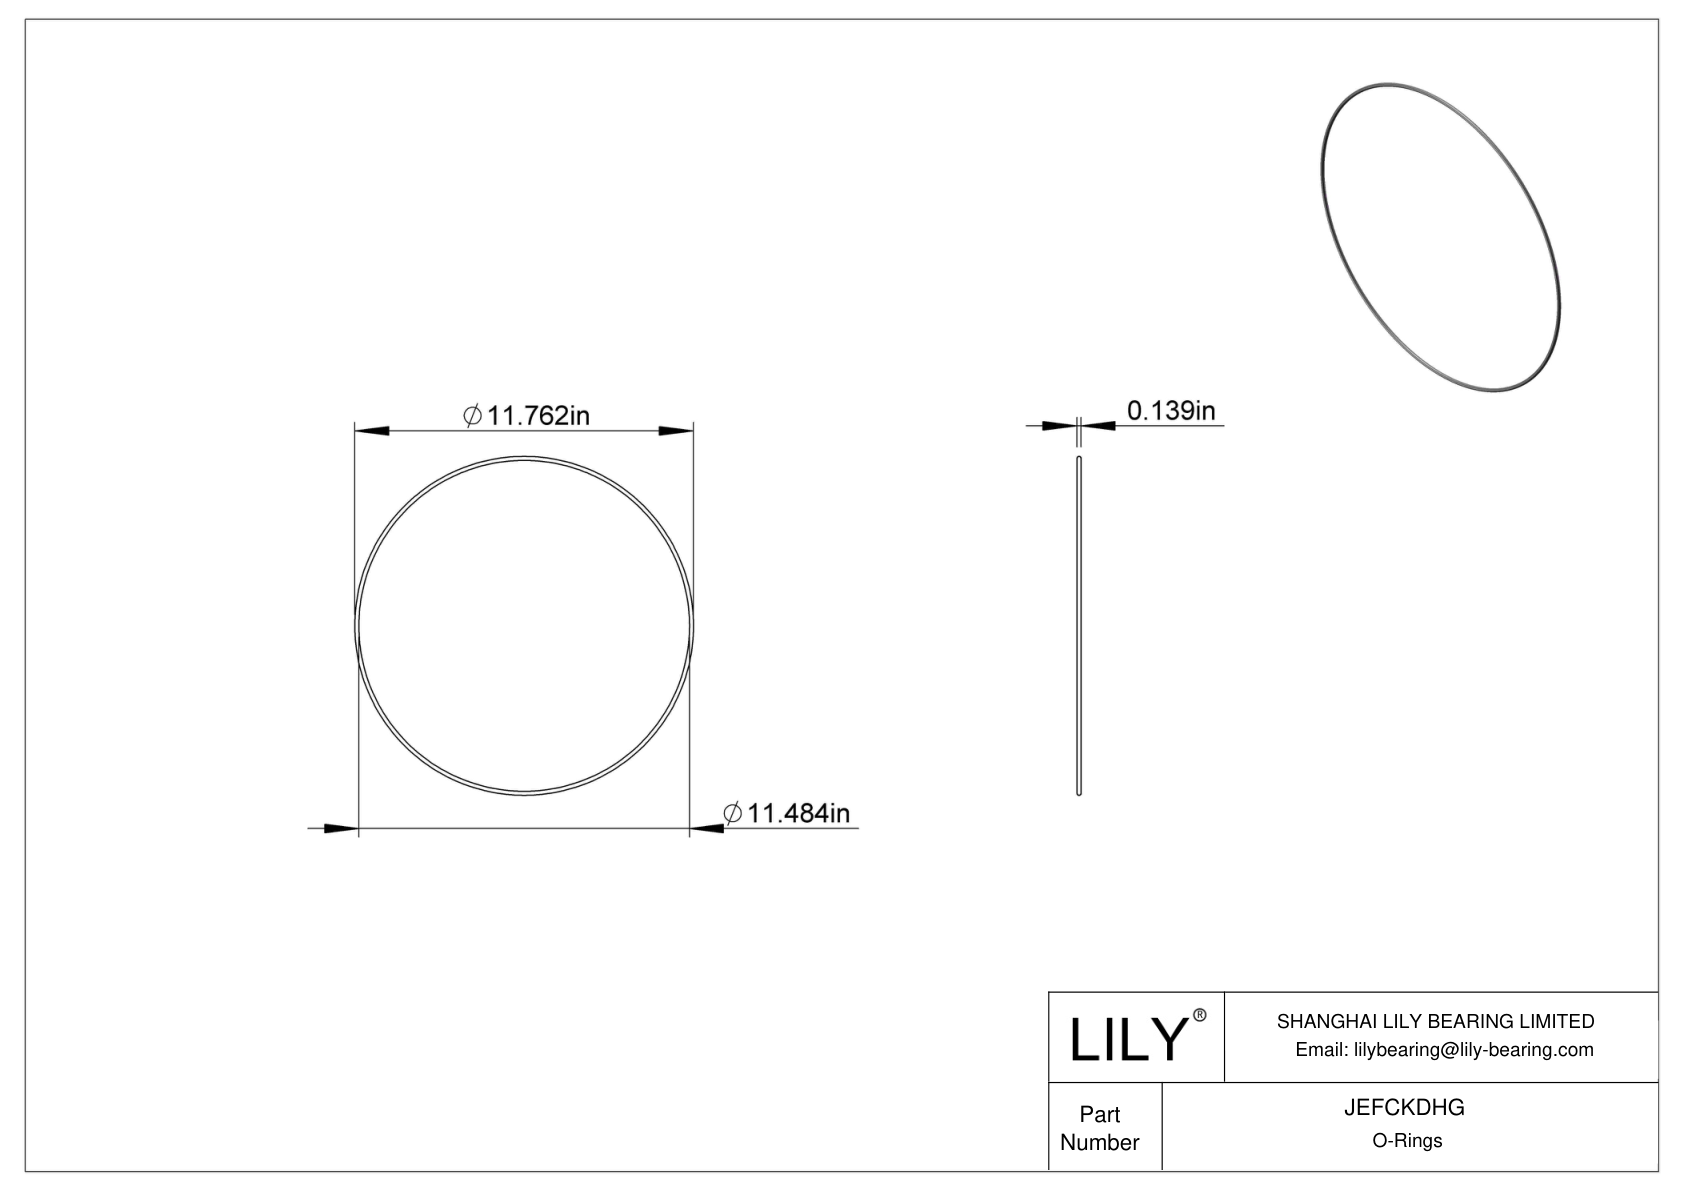 JEFCKDHG Oil Resistant O-Rings Round cad drawing